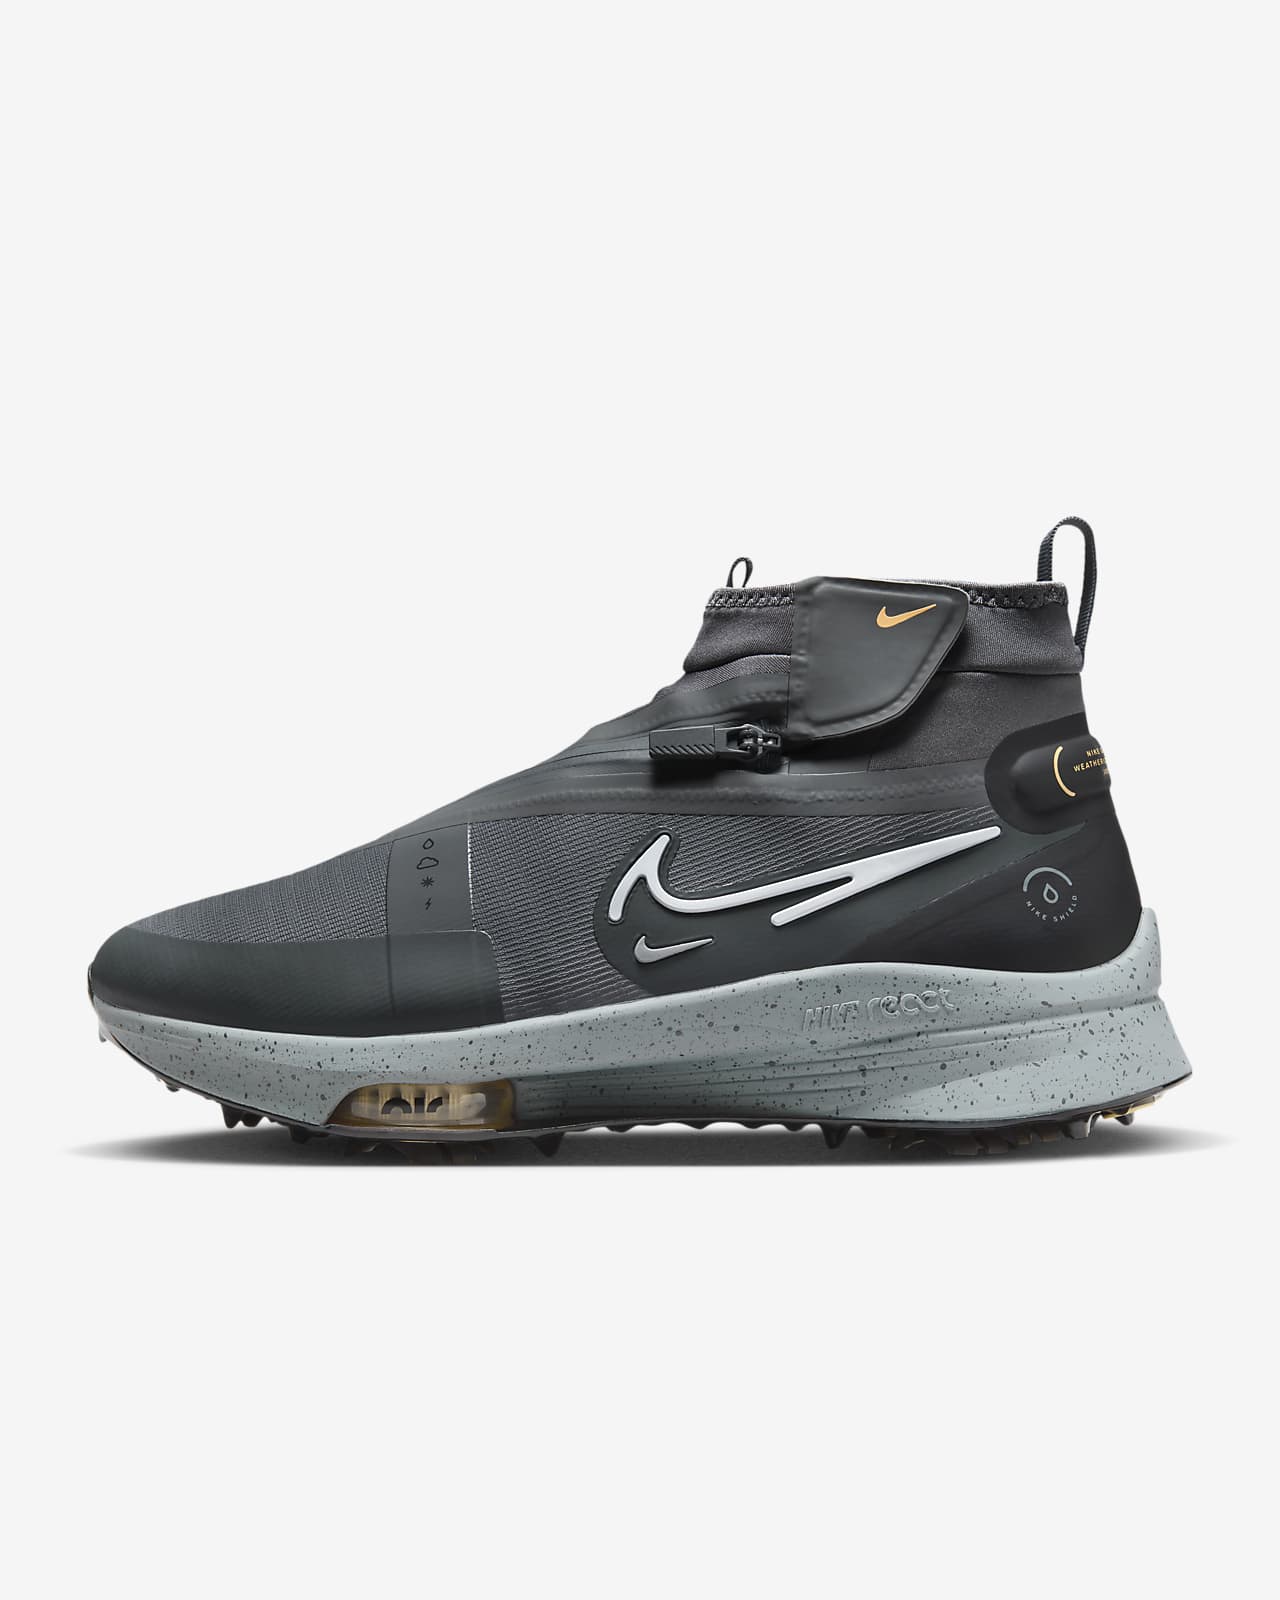 Nike Air Zoom Infinity Tour NEXT% Shield Weatherized Golf Shoes 